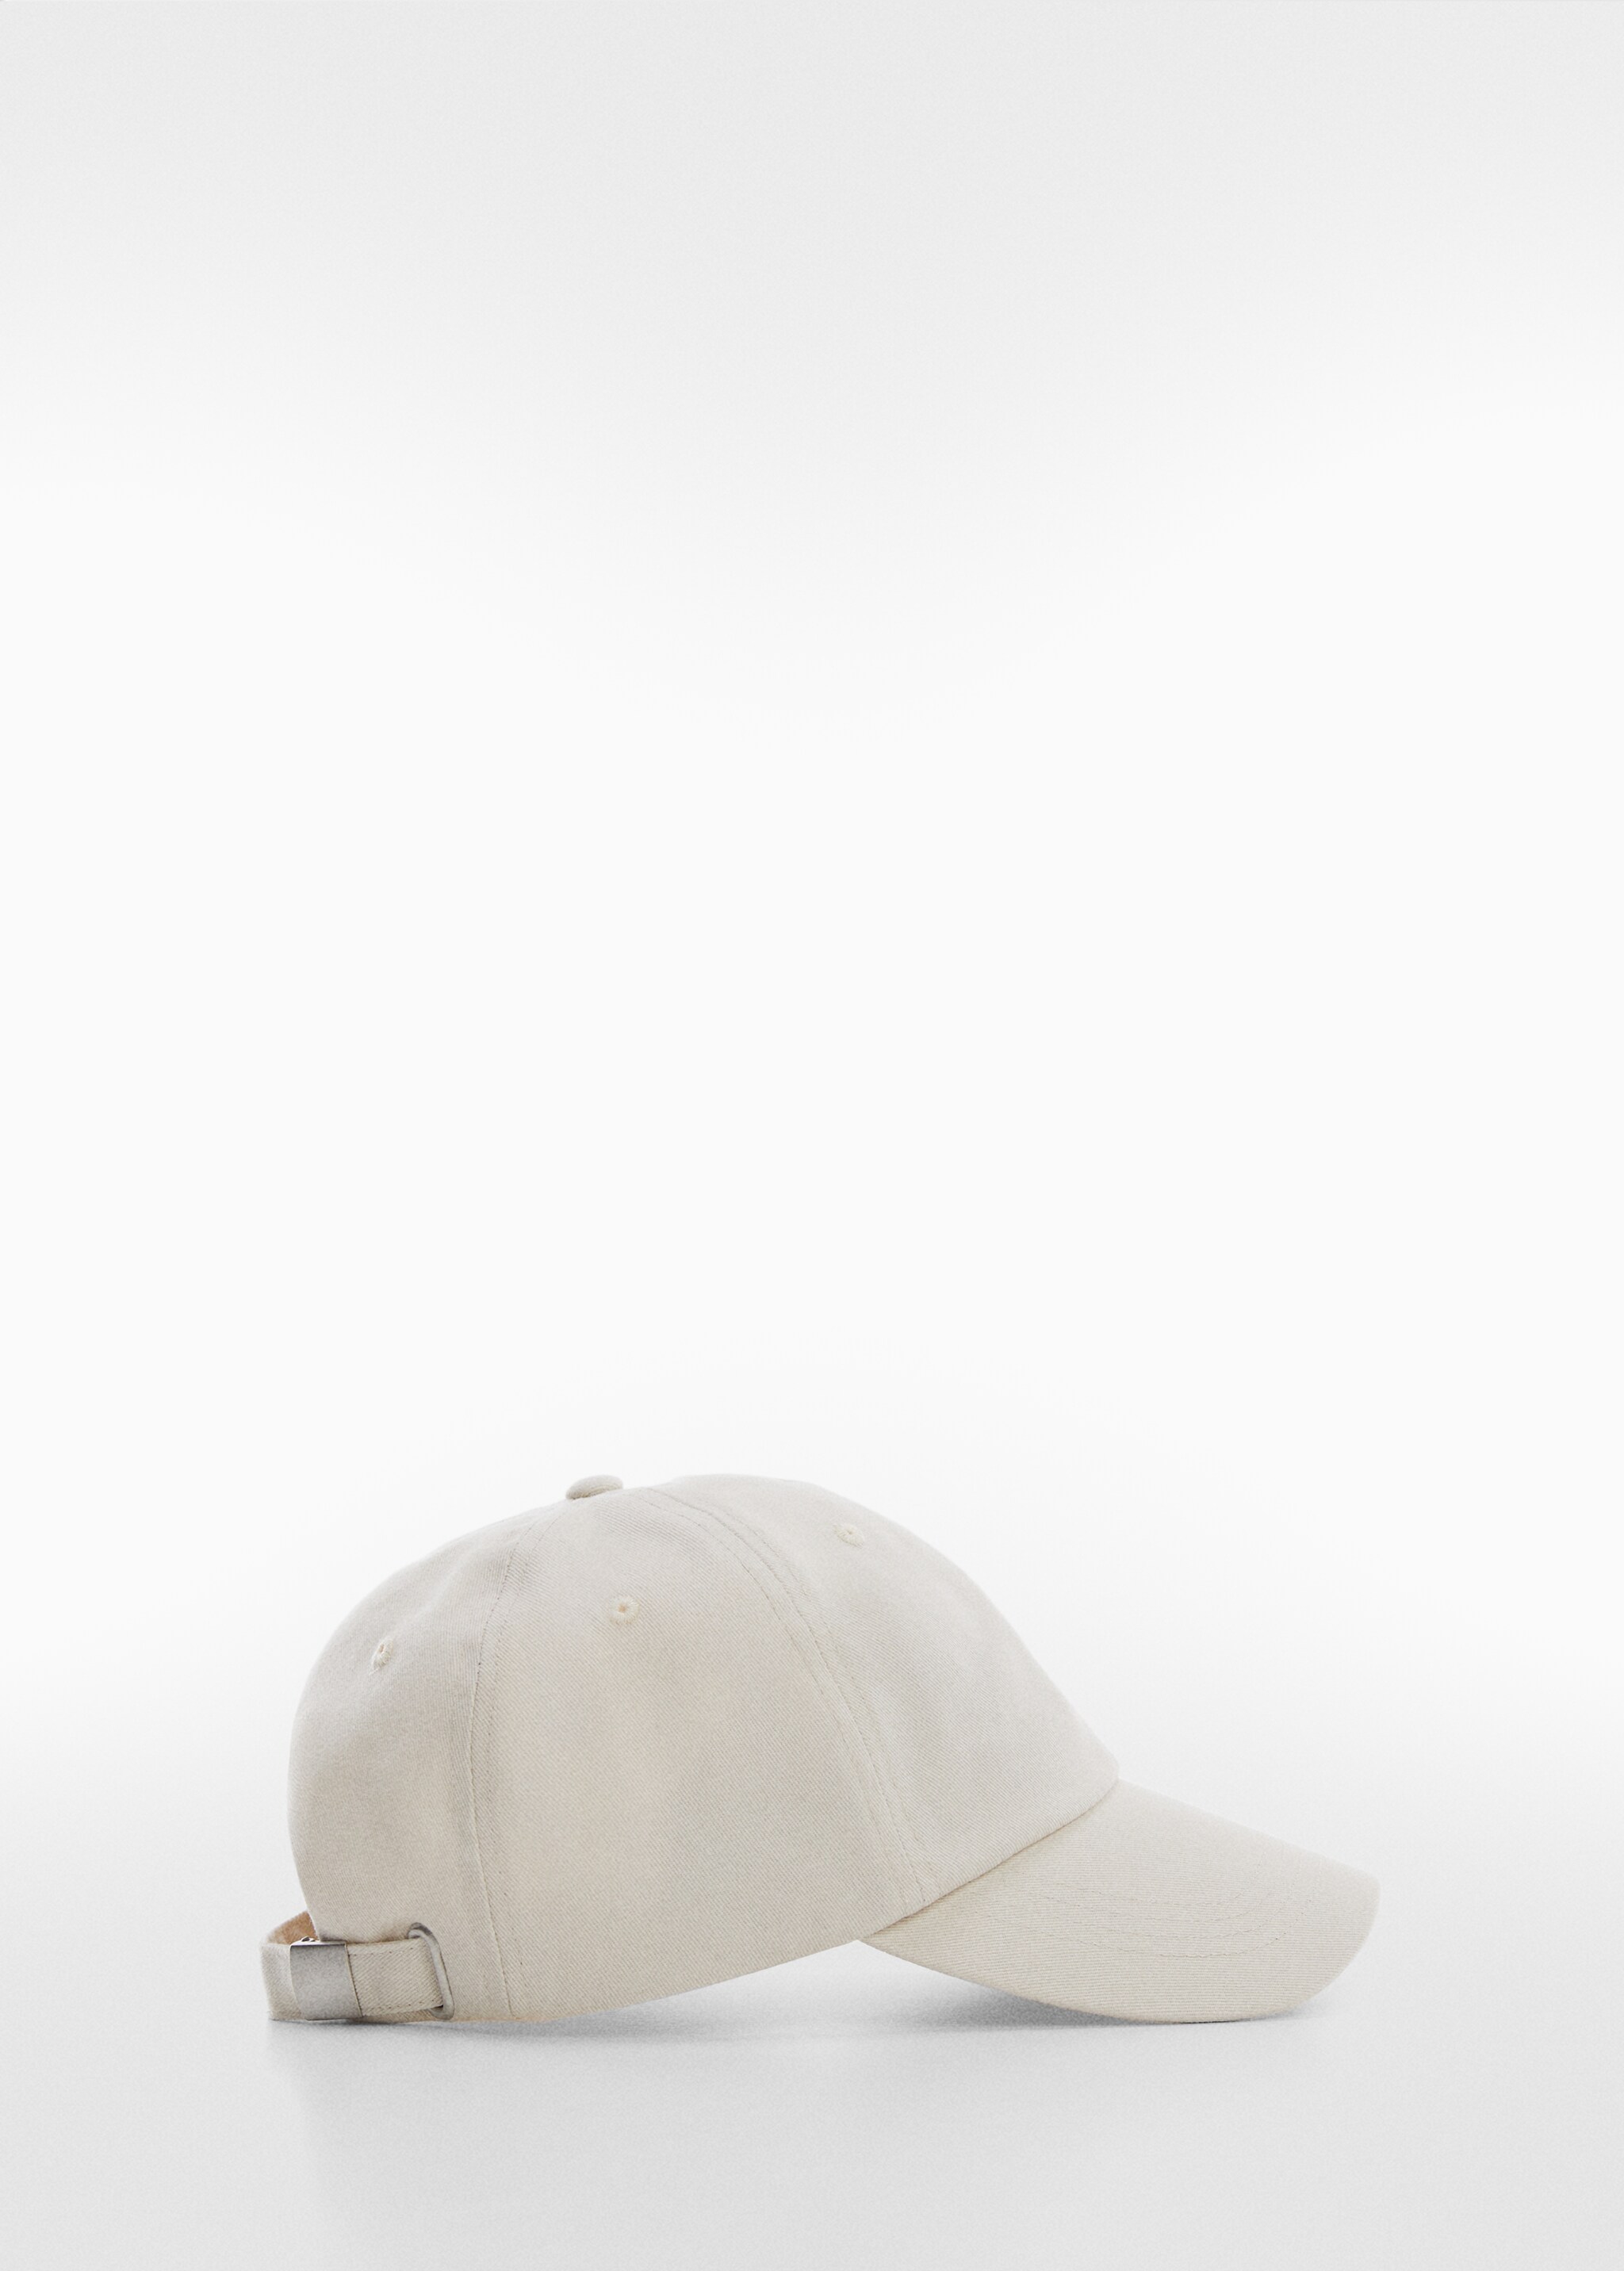 Embroidered cotton cap - Article without model